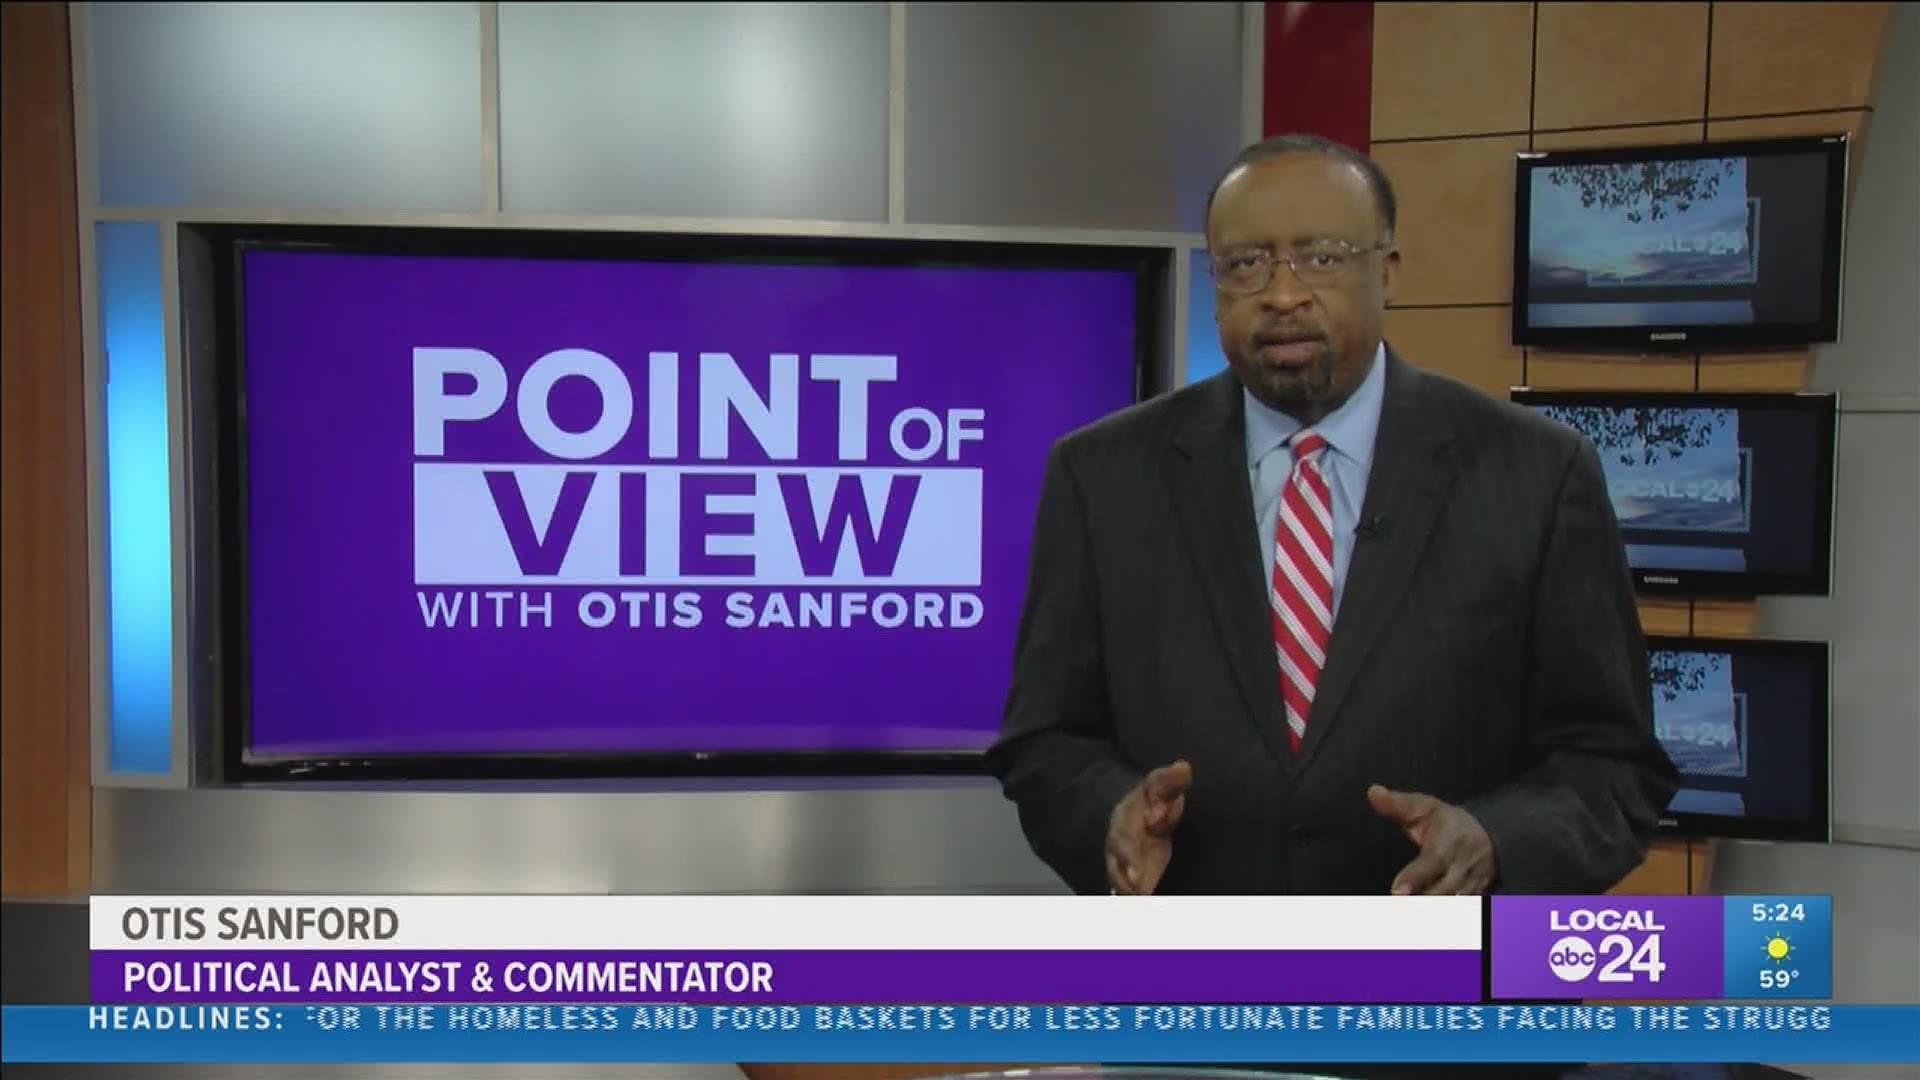 Local 24 News political analyst and commentator Otis Sanford shares his point of view on plans to erect a statue honoring Ida B. Wells.